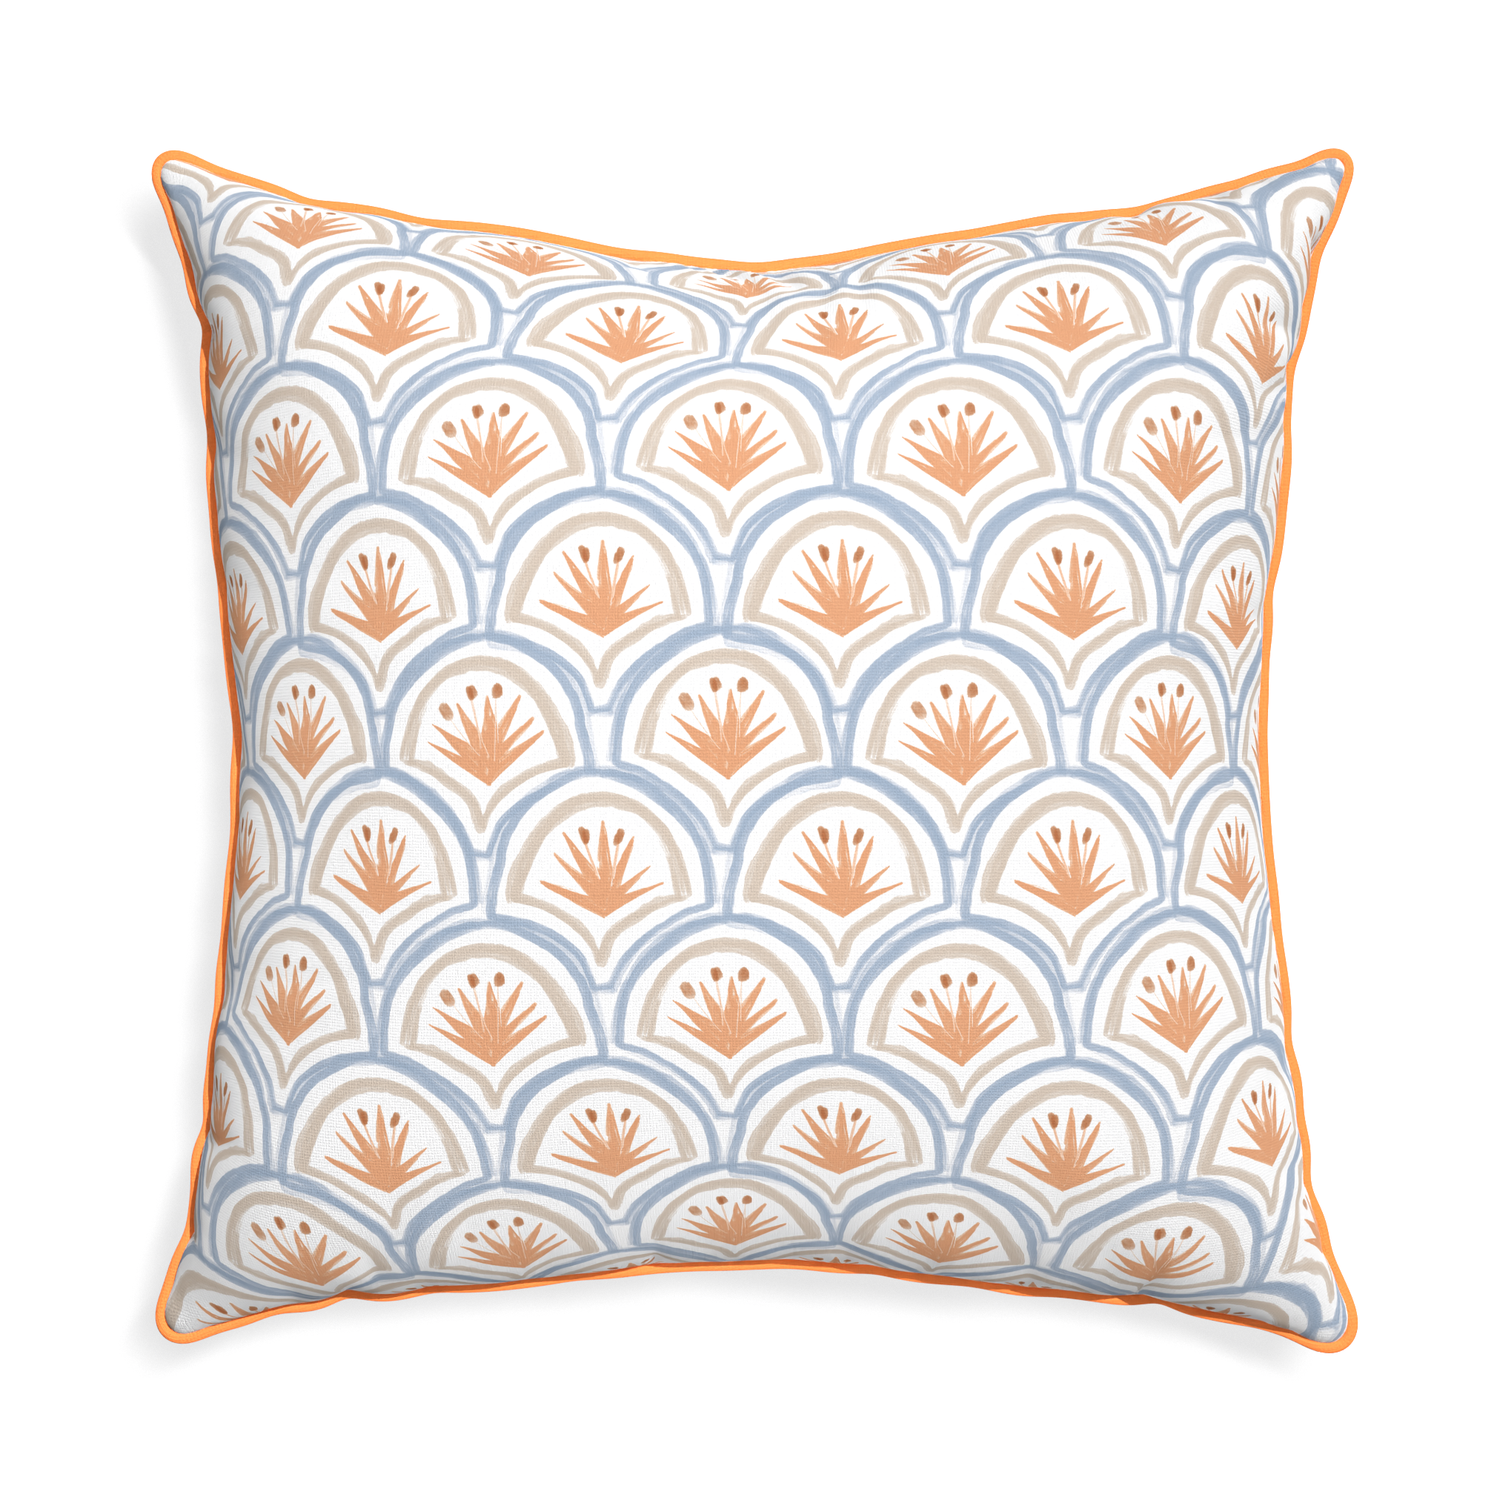 Euro-sham thatcher apricot custom pillow with clementine piping on white background